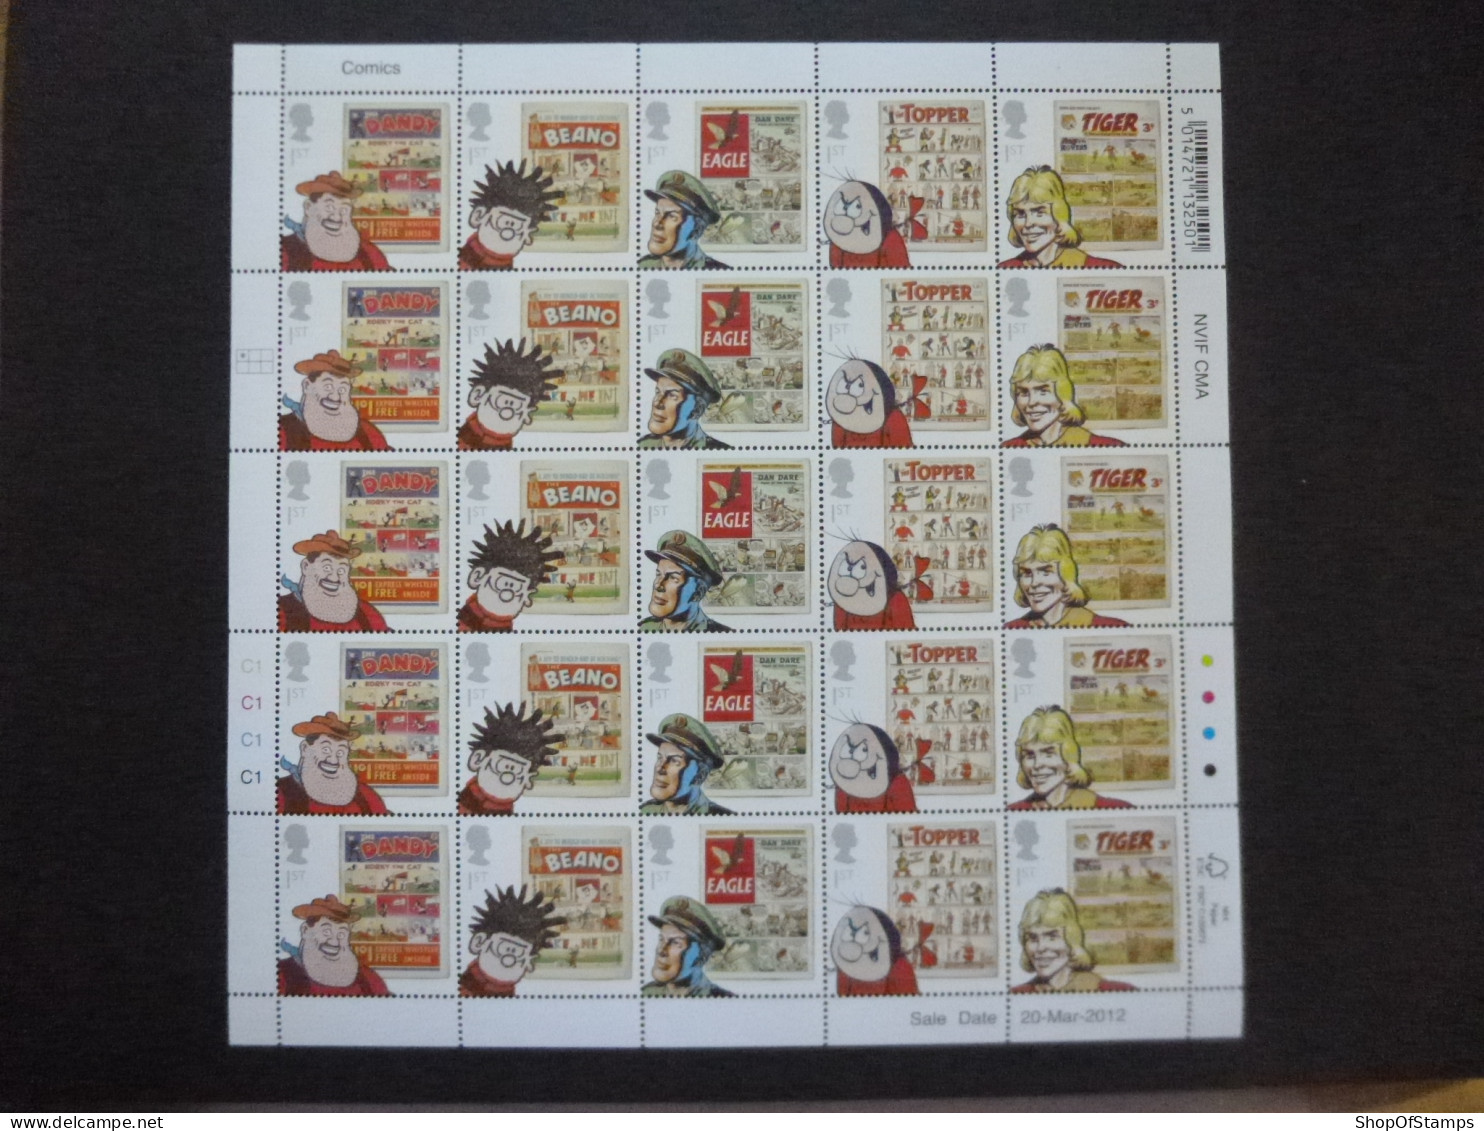 GREAT BRITAIN SG 3187+  2012 COMICS FULL SHEETS 25 STAMPS - Sheets, Plate Blocks & Multiples